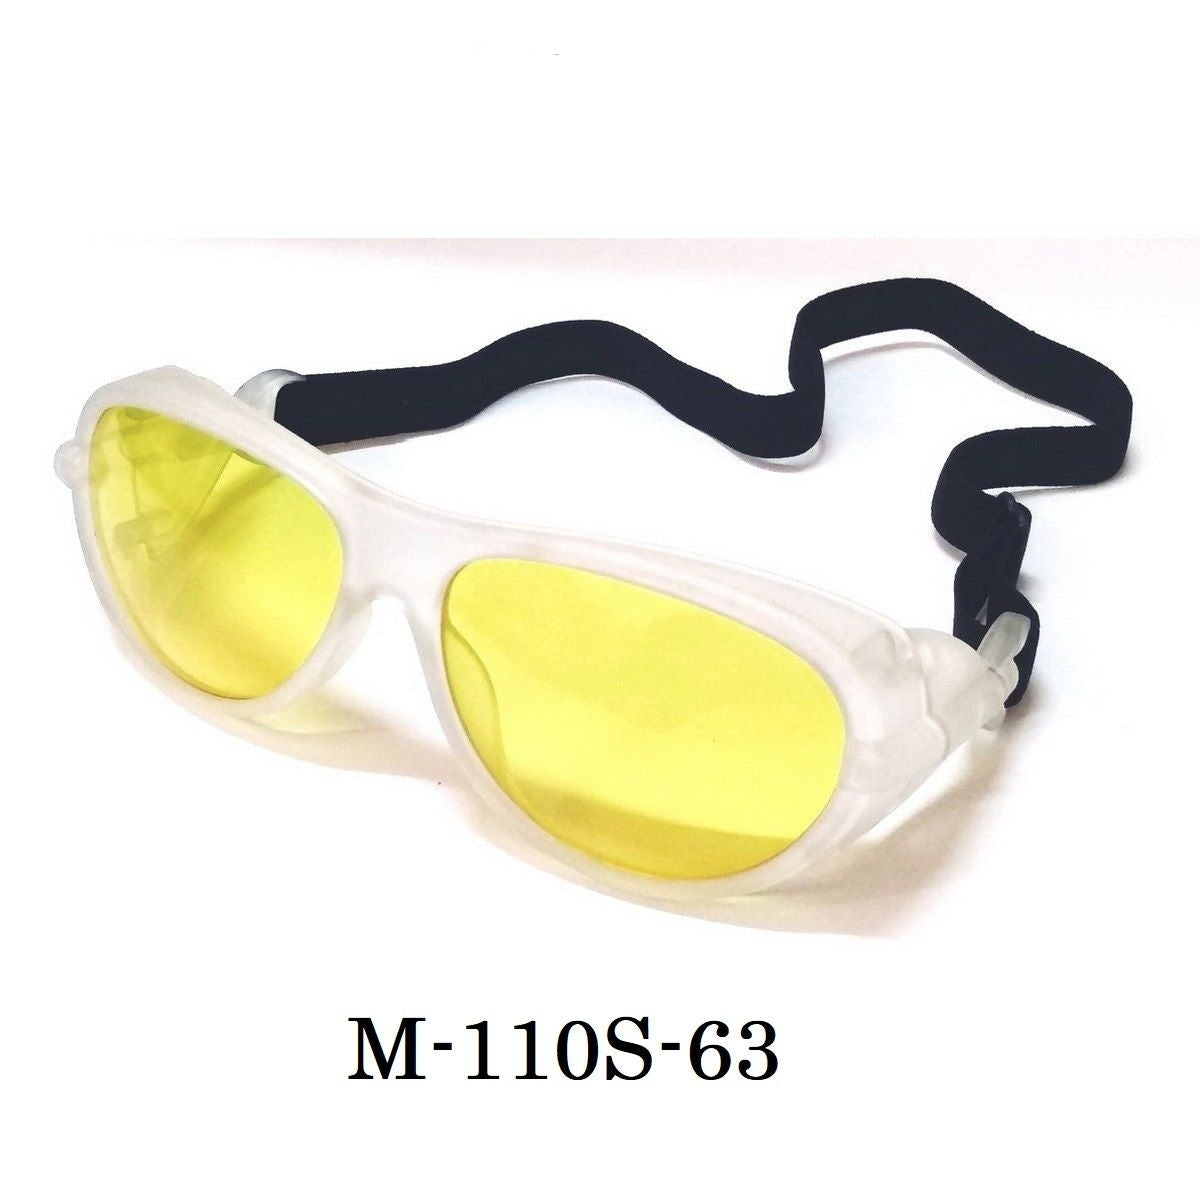 HD Vision Clear Frame Yellow Lens Prescription Biker Cycling Night Driving Glasses Sunglasses with Strap